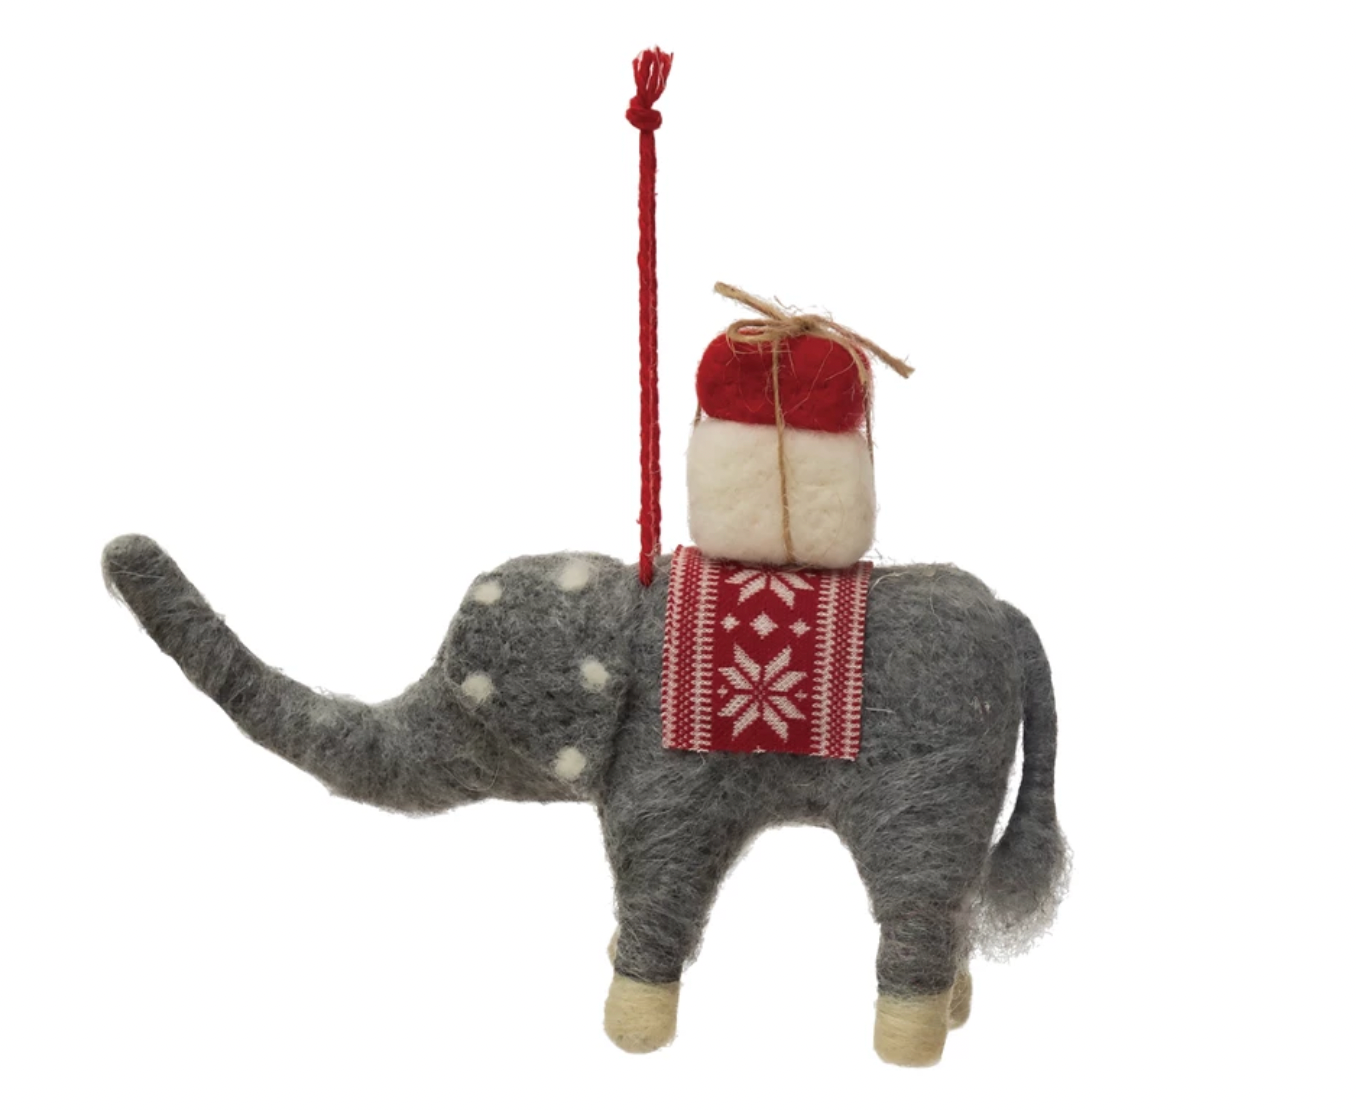 Wool Felt Elephant Ornament with Gifts